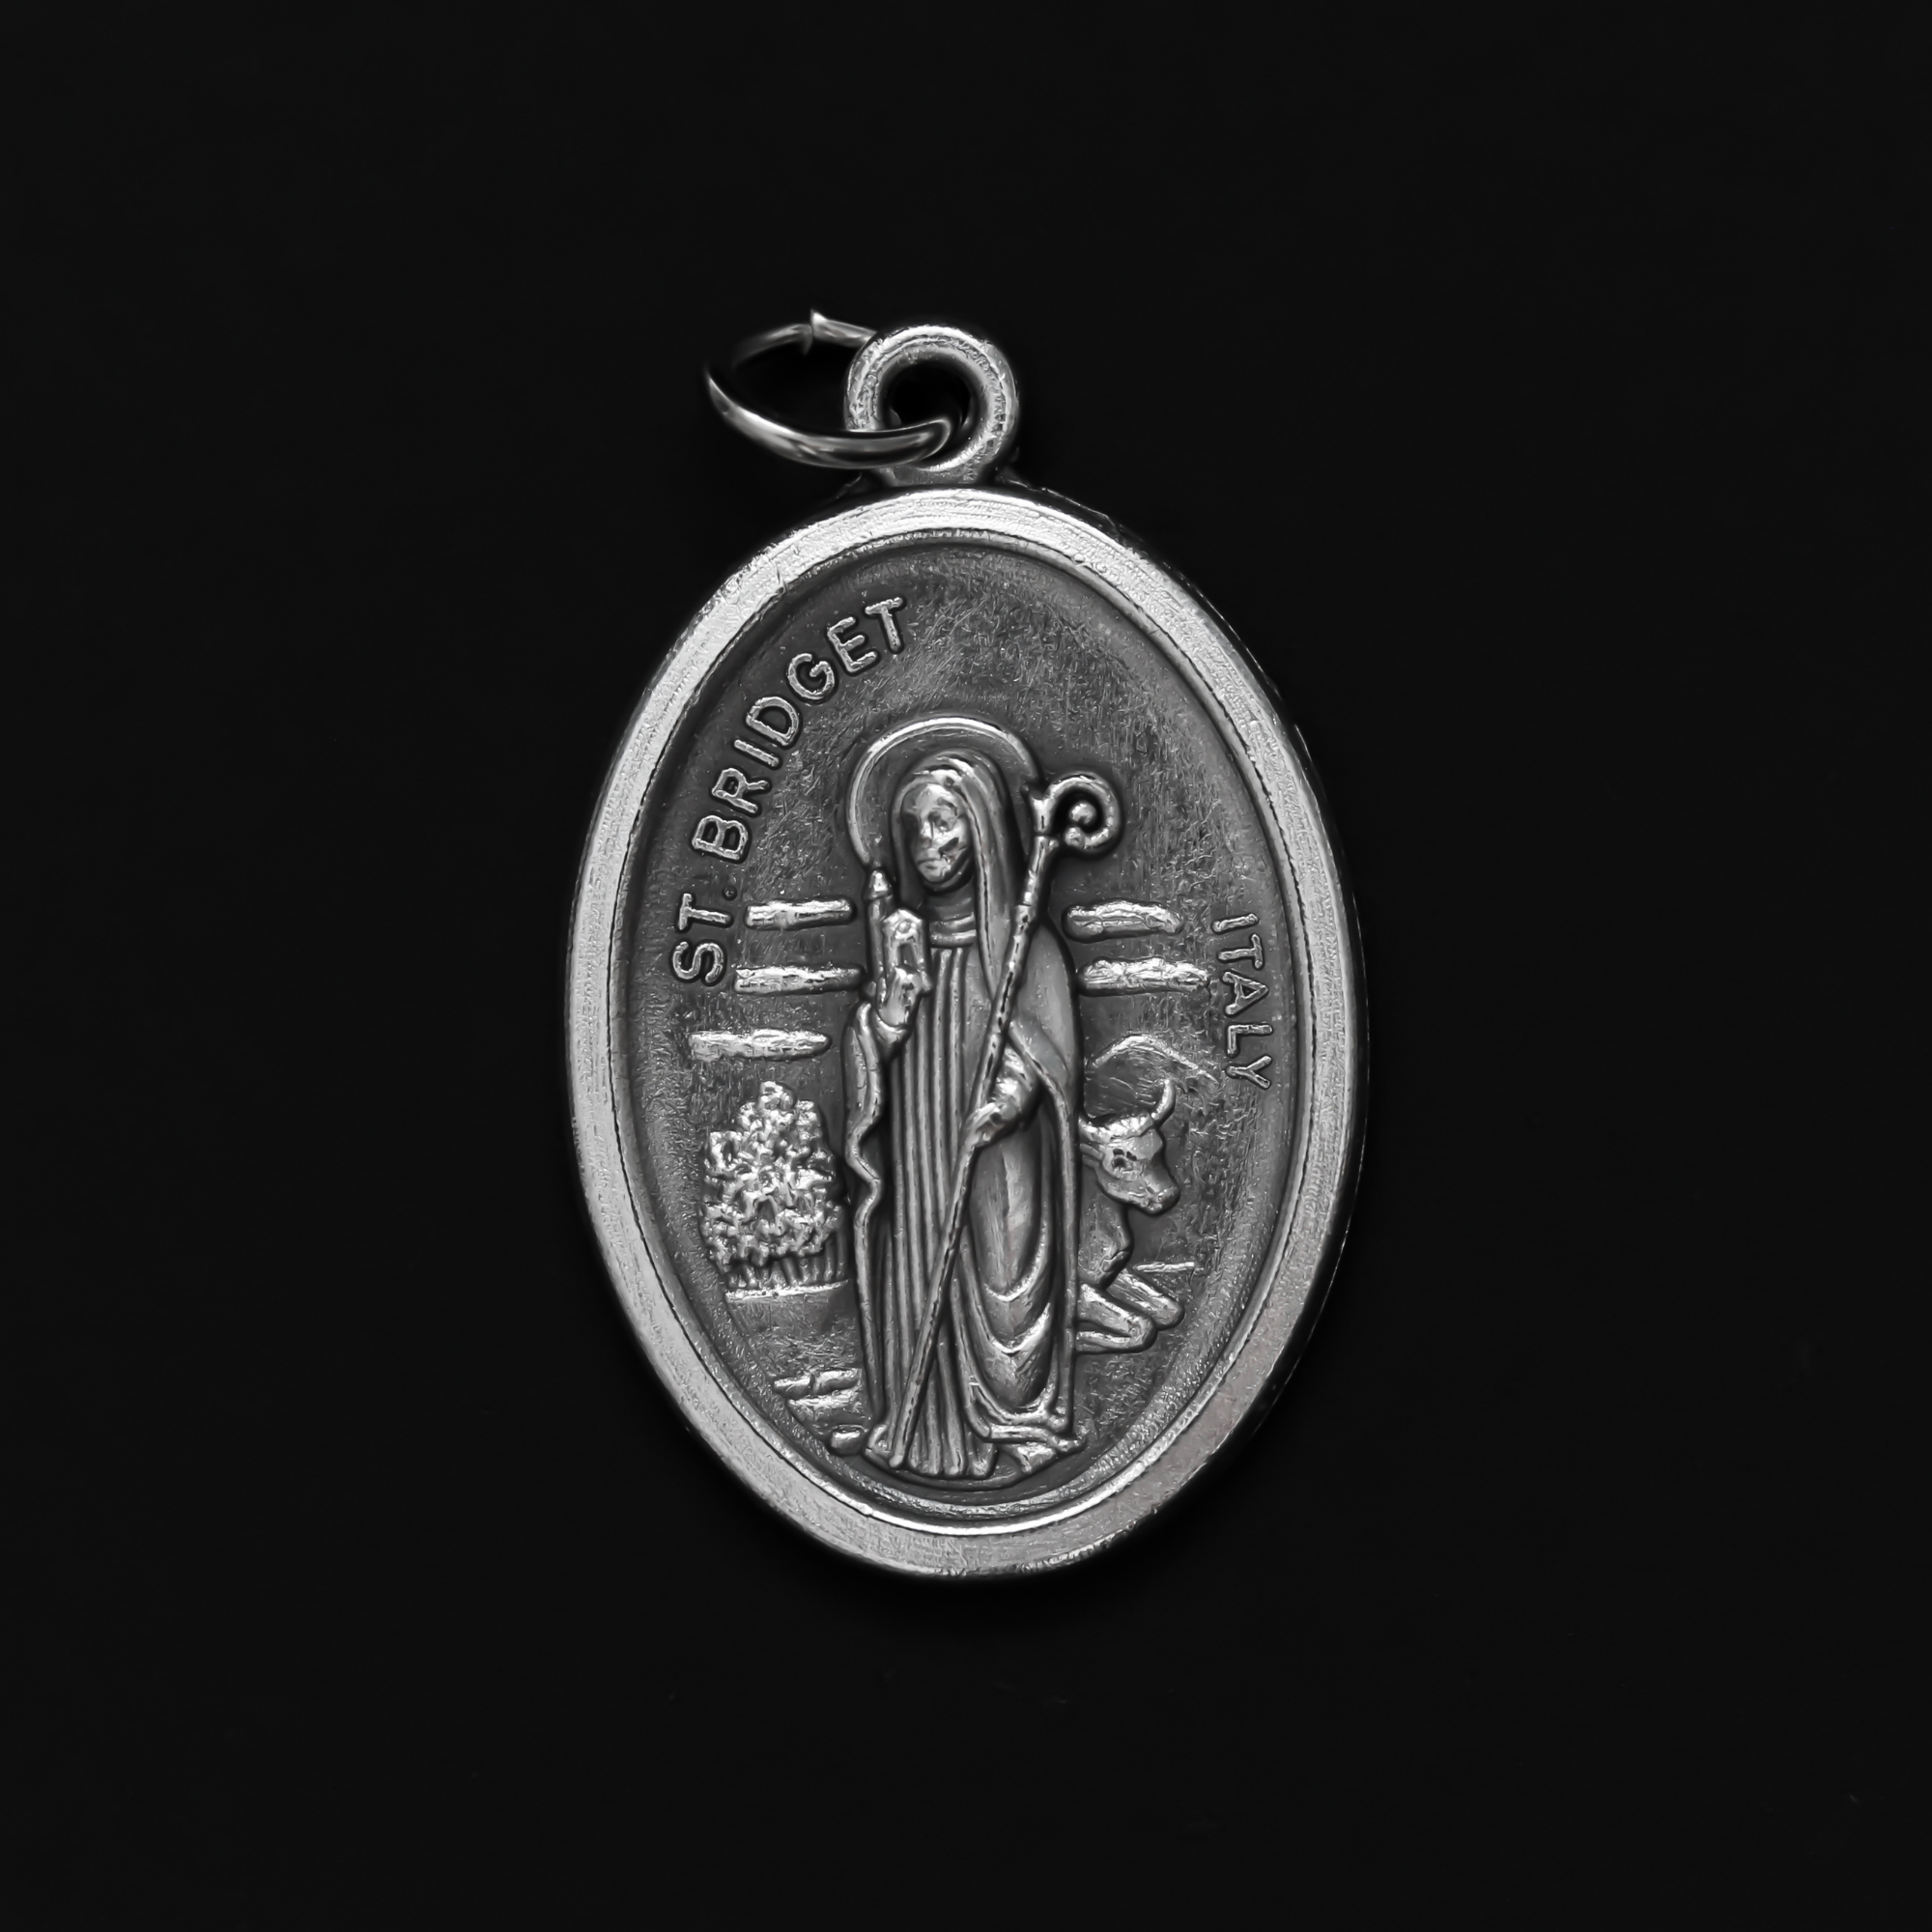 St. Bridget (Brigid) oval medal that depicts the saint on the front and "Pray For Us" on the back.